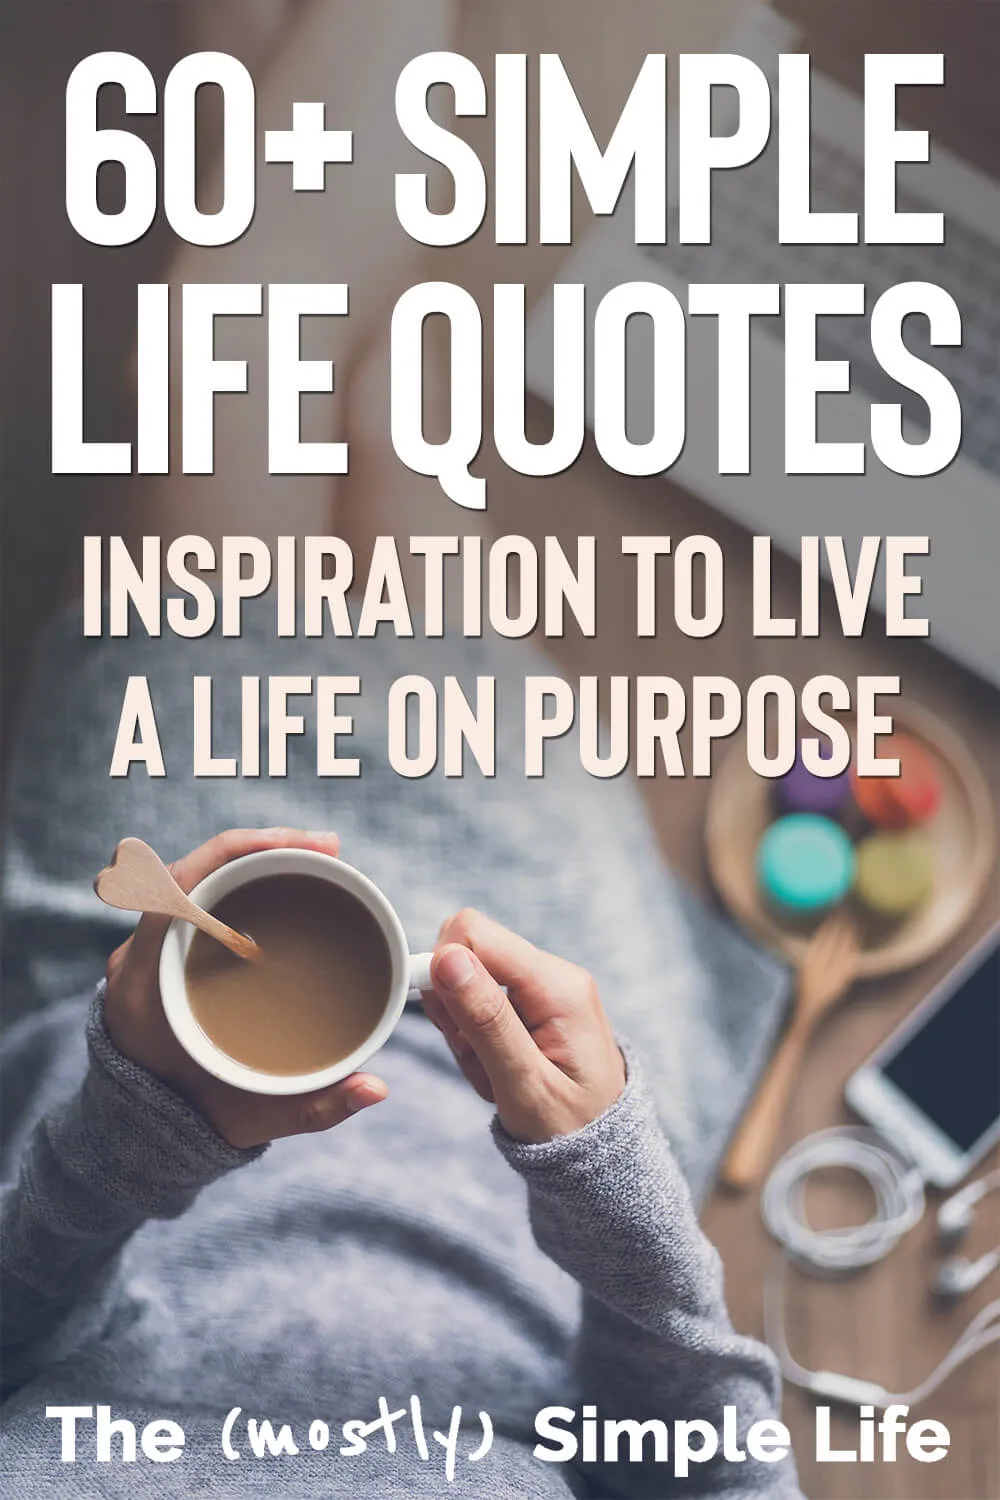 110 Simple Life Quotes to Inspire You to a Simple & Happy Life